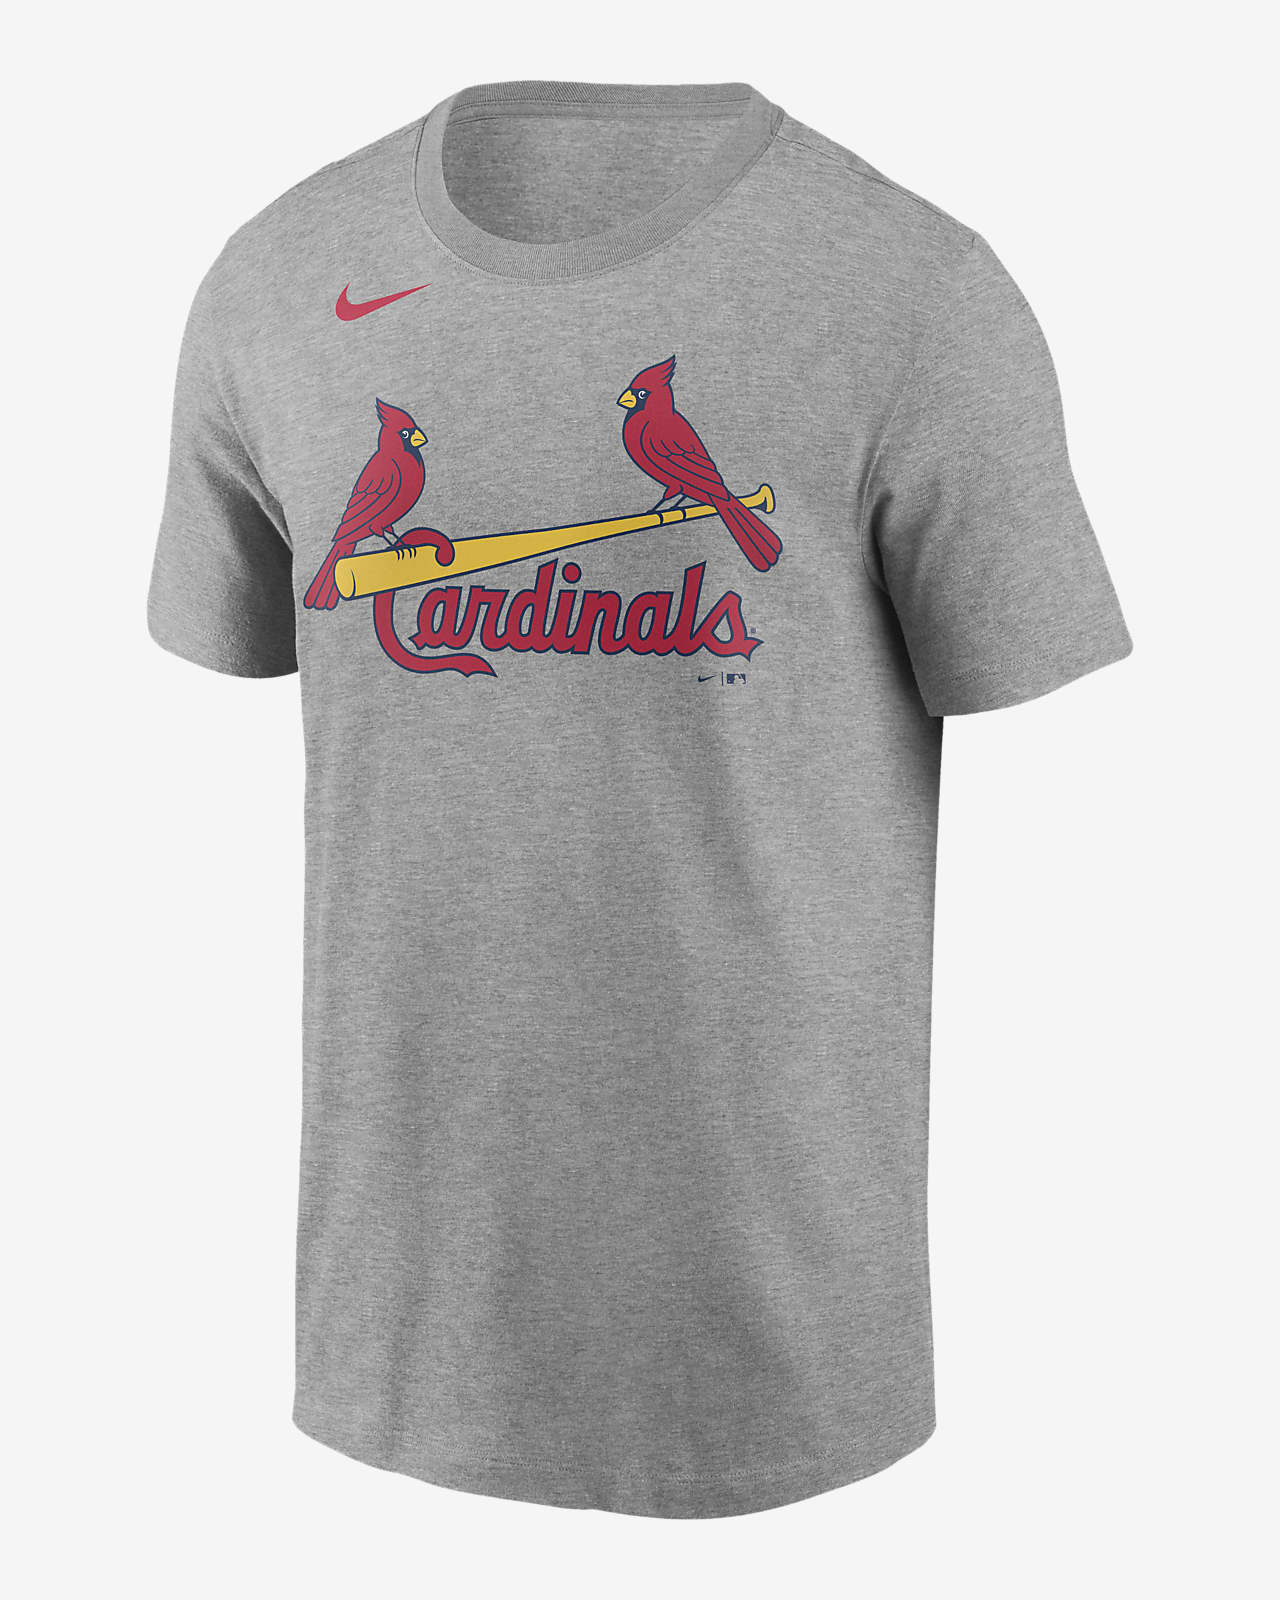 cardinals t shirts,www.mcoxley.in